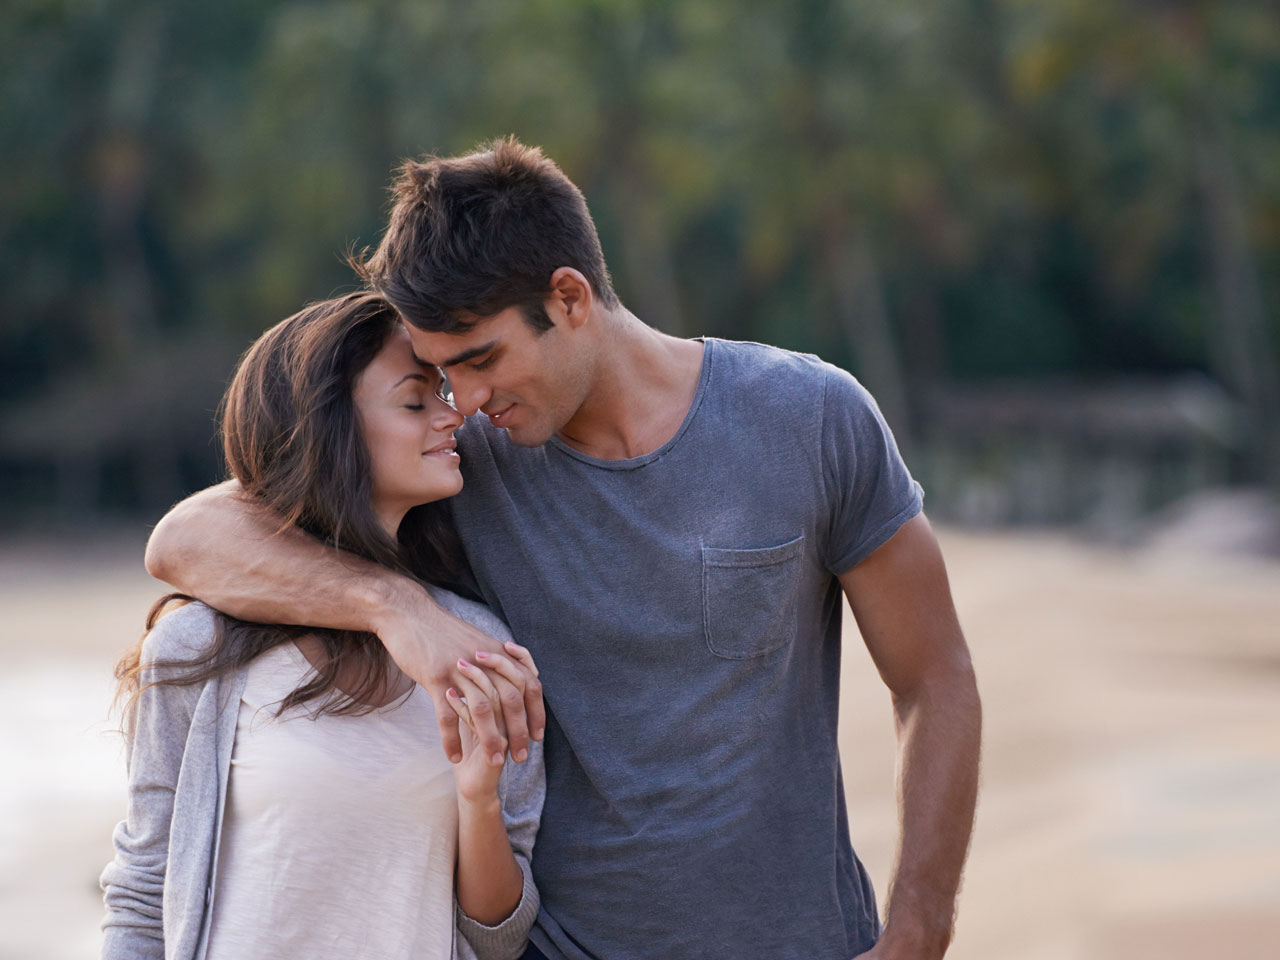 30 ways to get the girl of your dreams